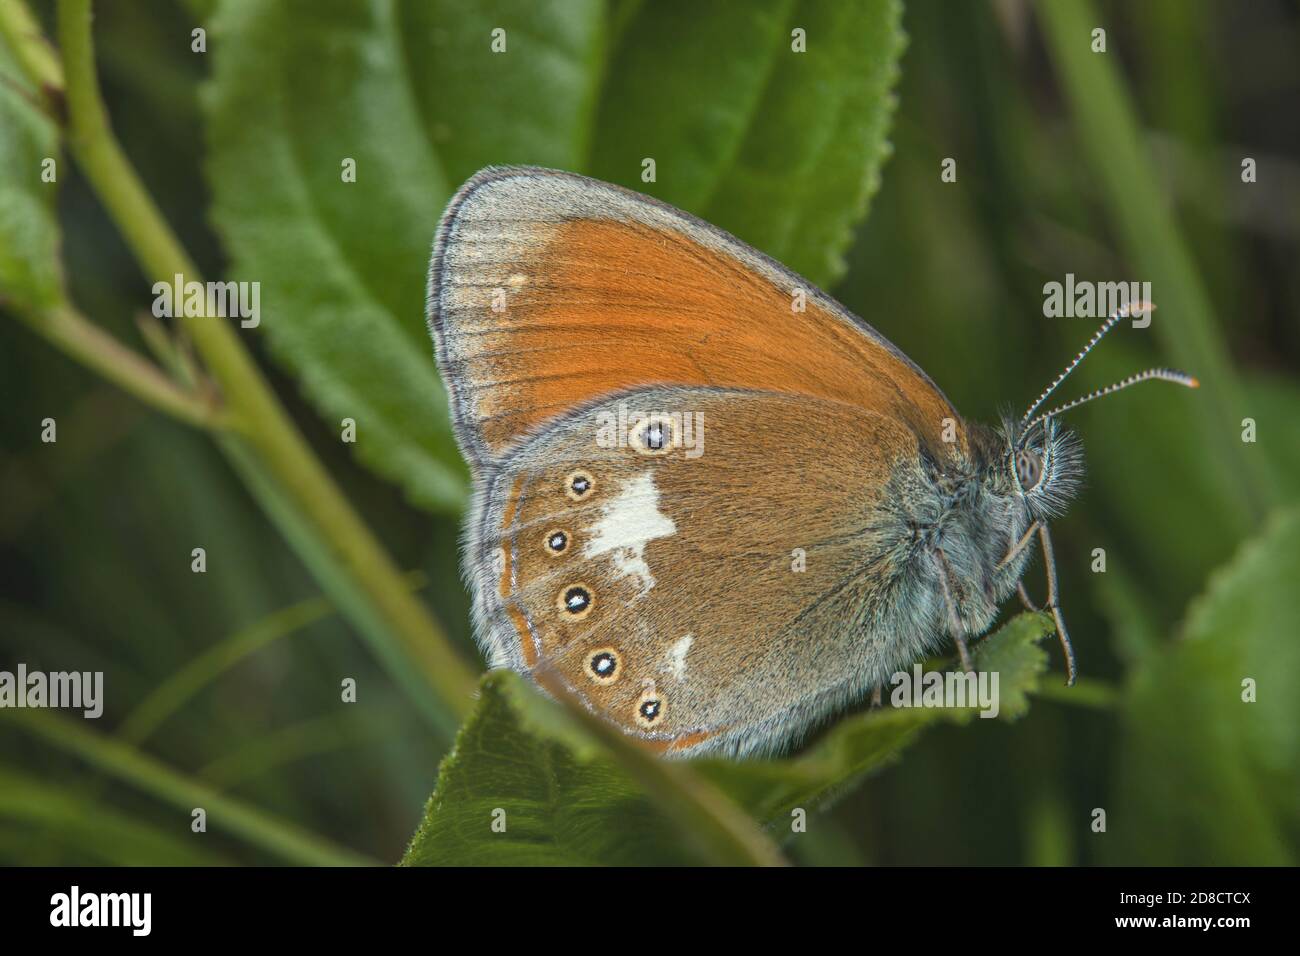 Chestnut heath (Coenonympha glycerion, Coenonympha iphis), sitting on a leaf, side view, Germany Stock Photo